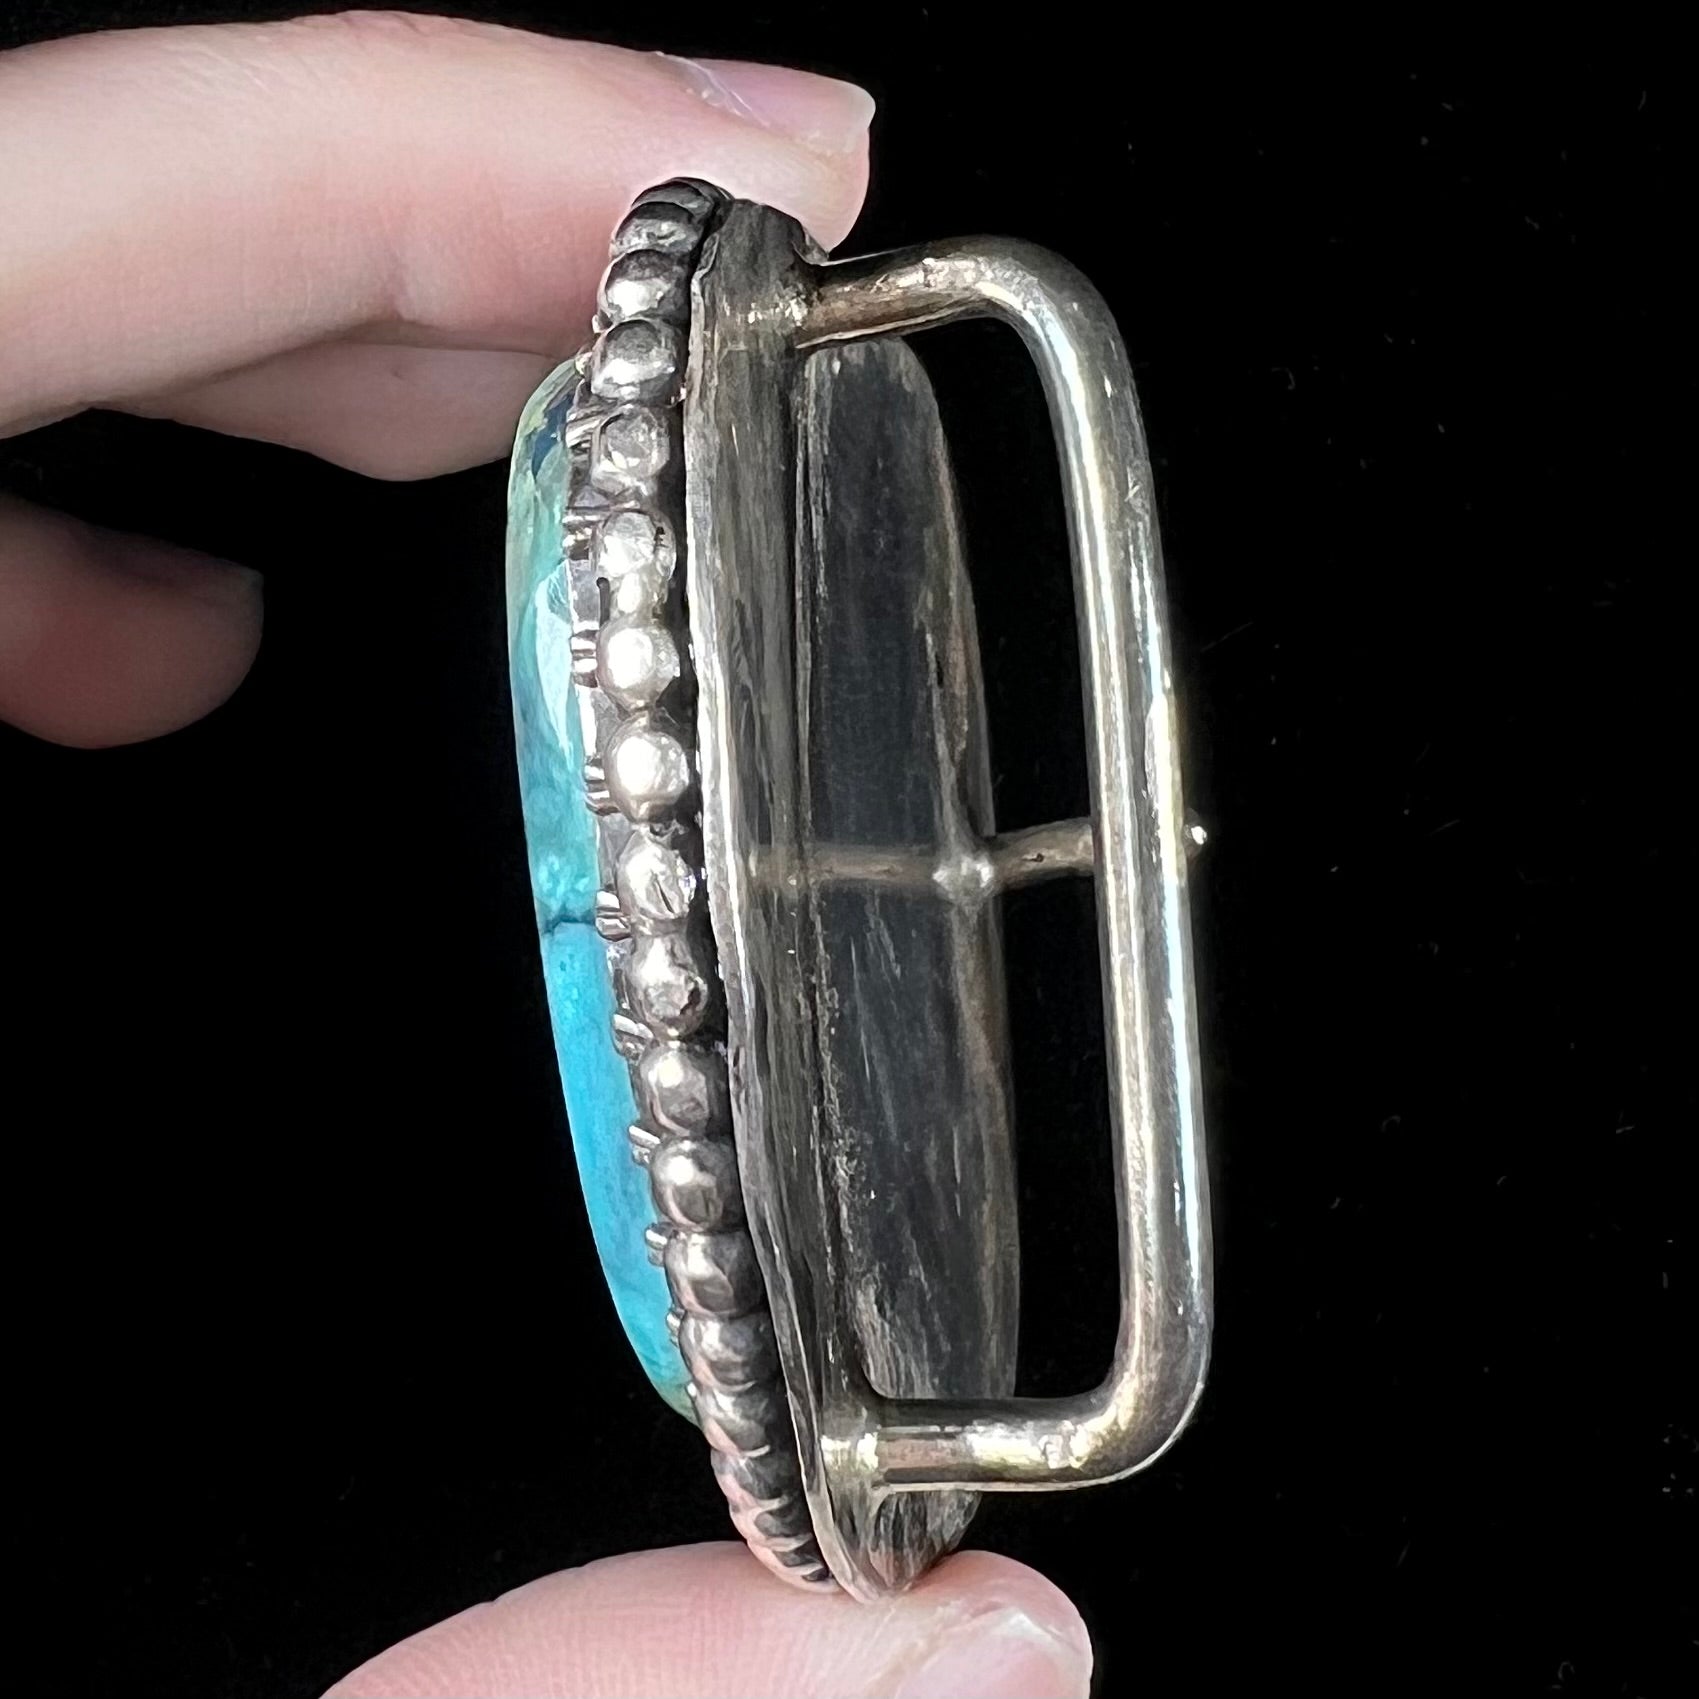 A sterling silver, unisex, Navajo style belt buckle set with a large Valley Blue turquoise stone.